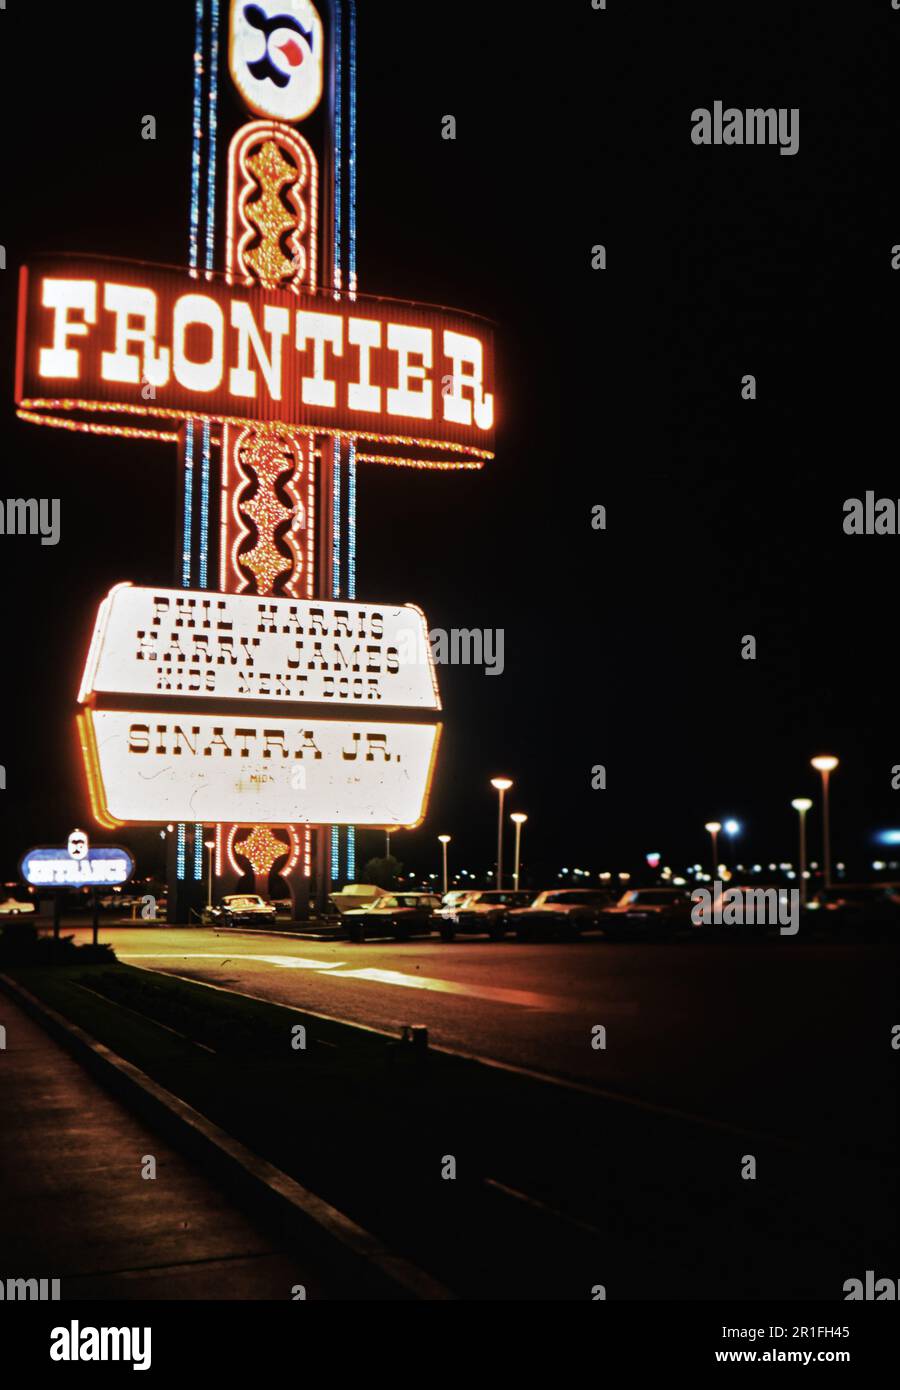 Frontier Hotel in Las Vegas Nevada, sign shows performers at the hotel include Phil Harris, Harry James, Kids Next Door and Frank Sinatra Jr. ca. 1971 Stock Photo